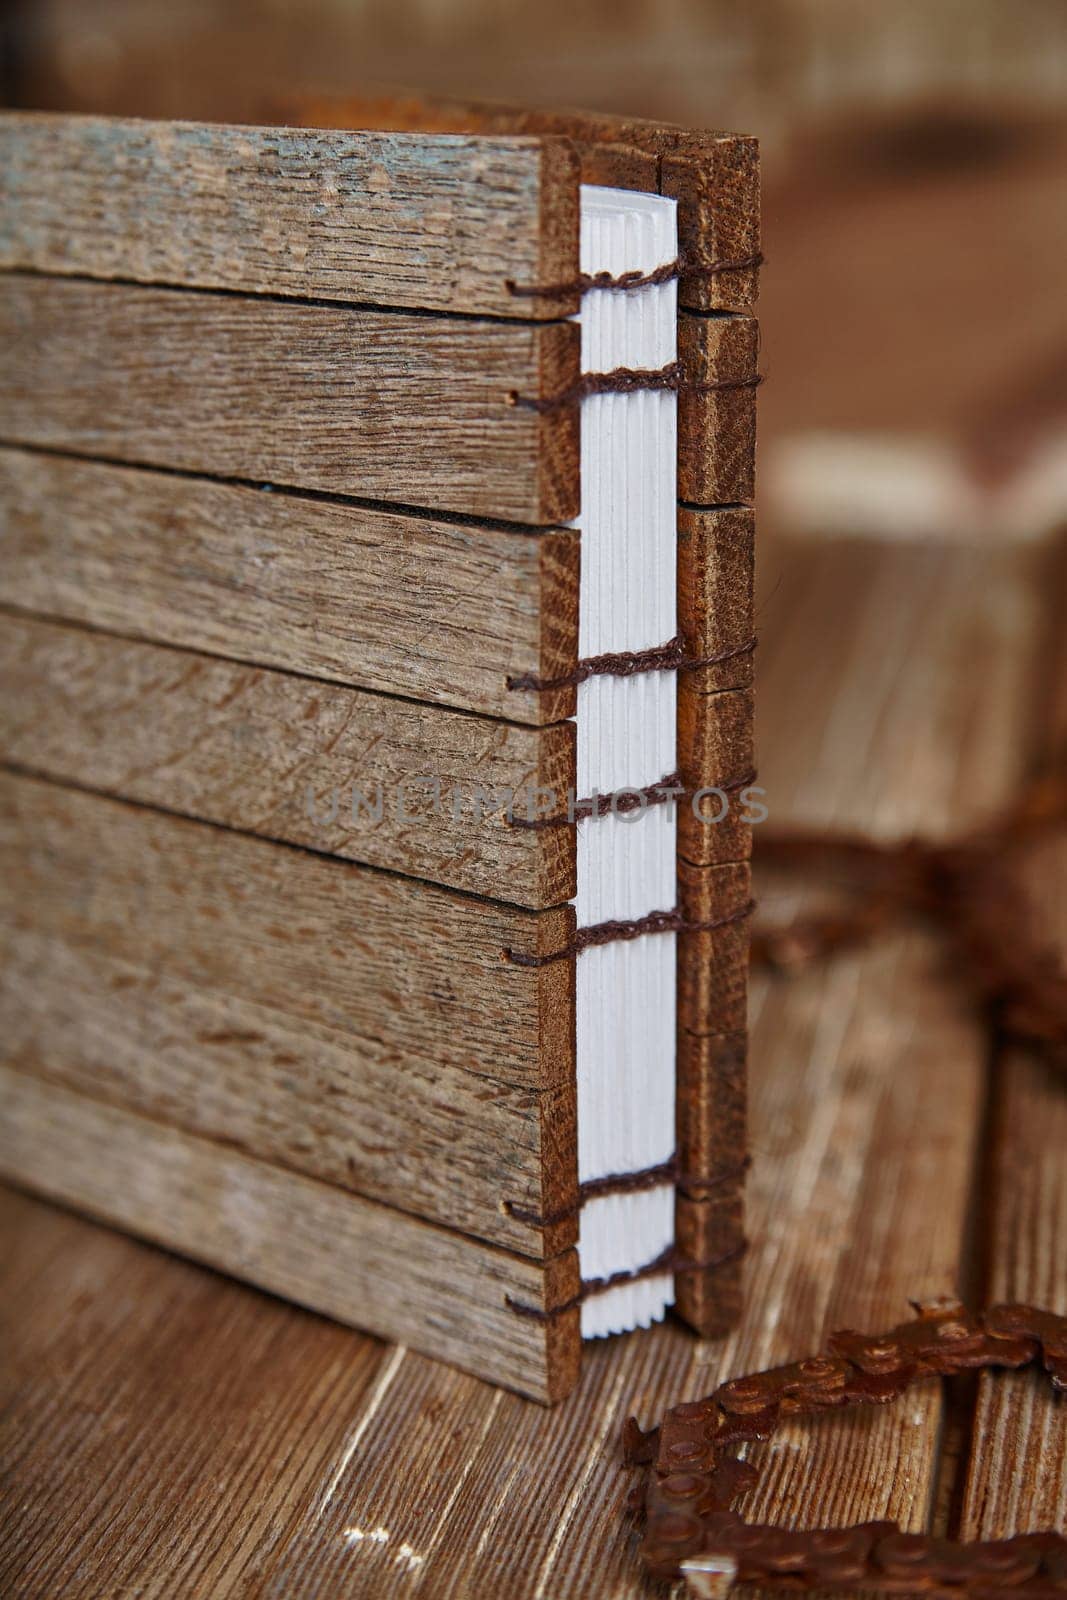 Handmade Rustic Wooden Notebook with Coptic Stitch Binding Detail by njproductions